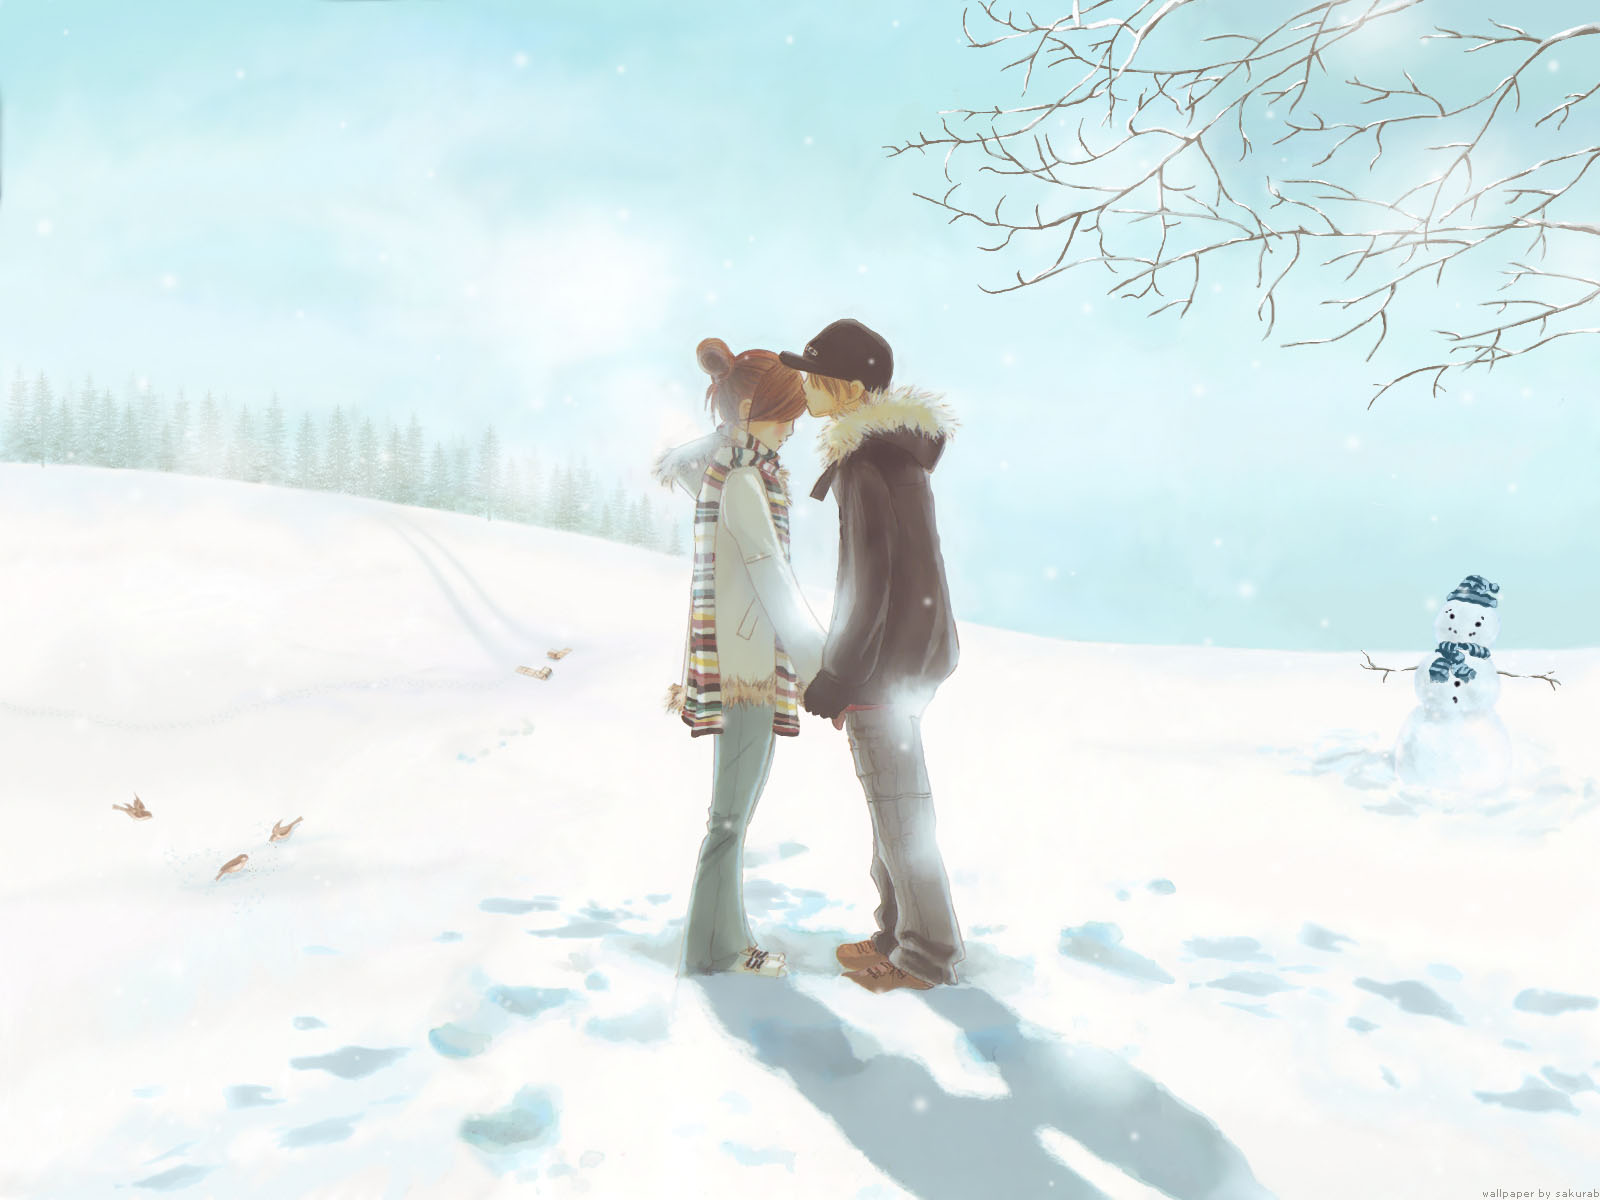 Anime Xmas Couples Wallpapers